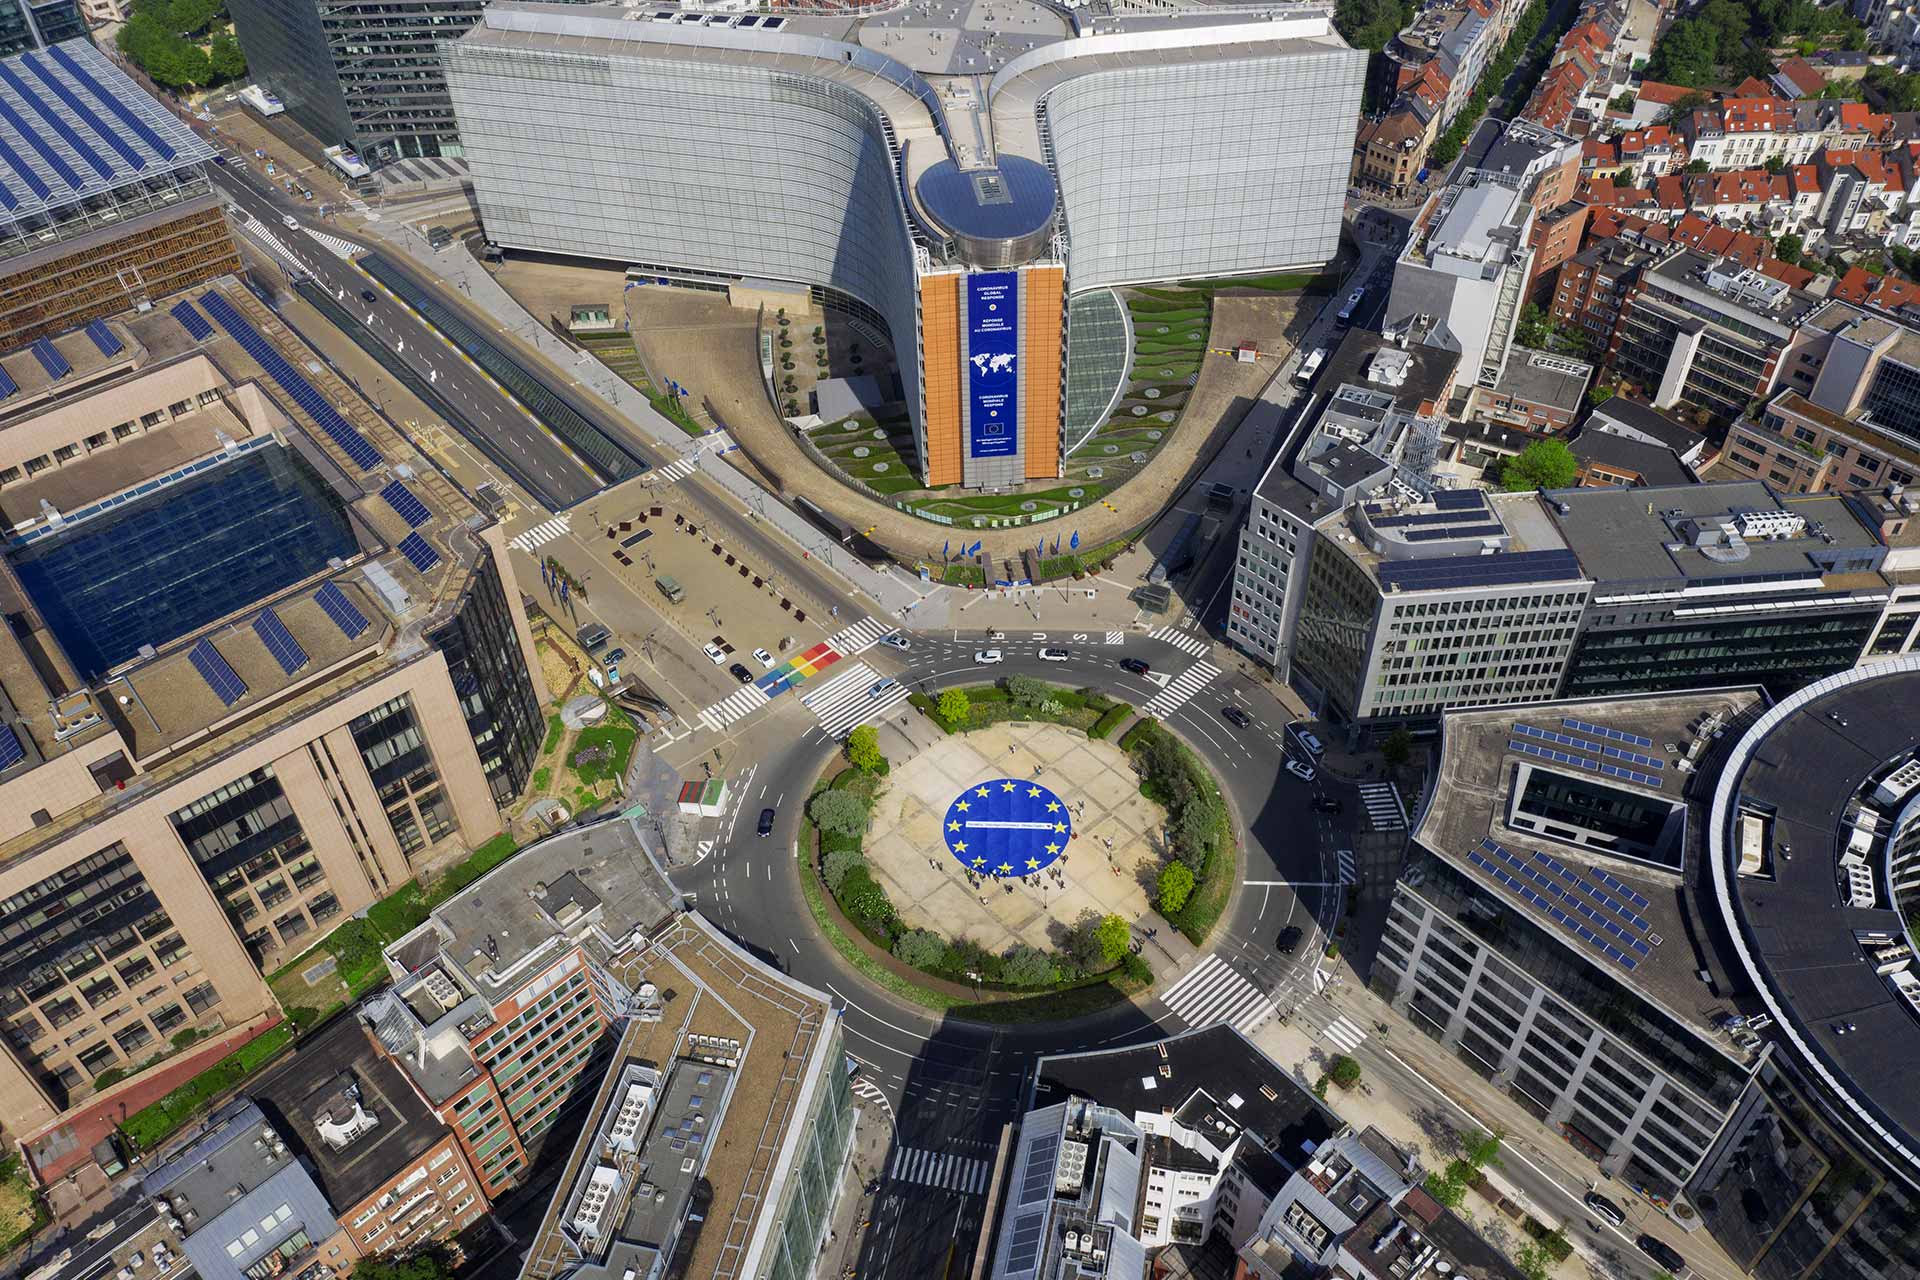 Aerial view of Rond-Point Schuman and the Berlaymont building